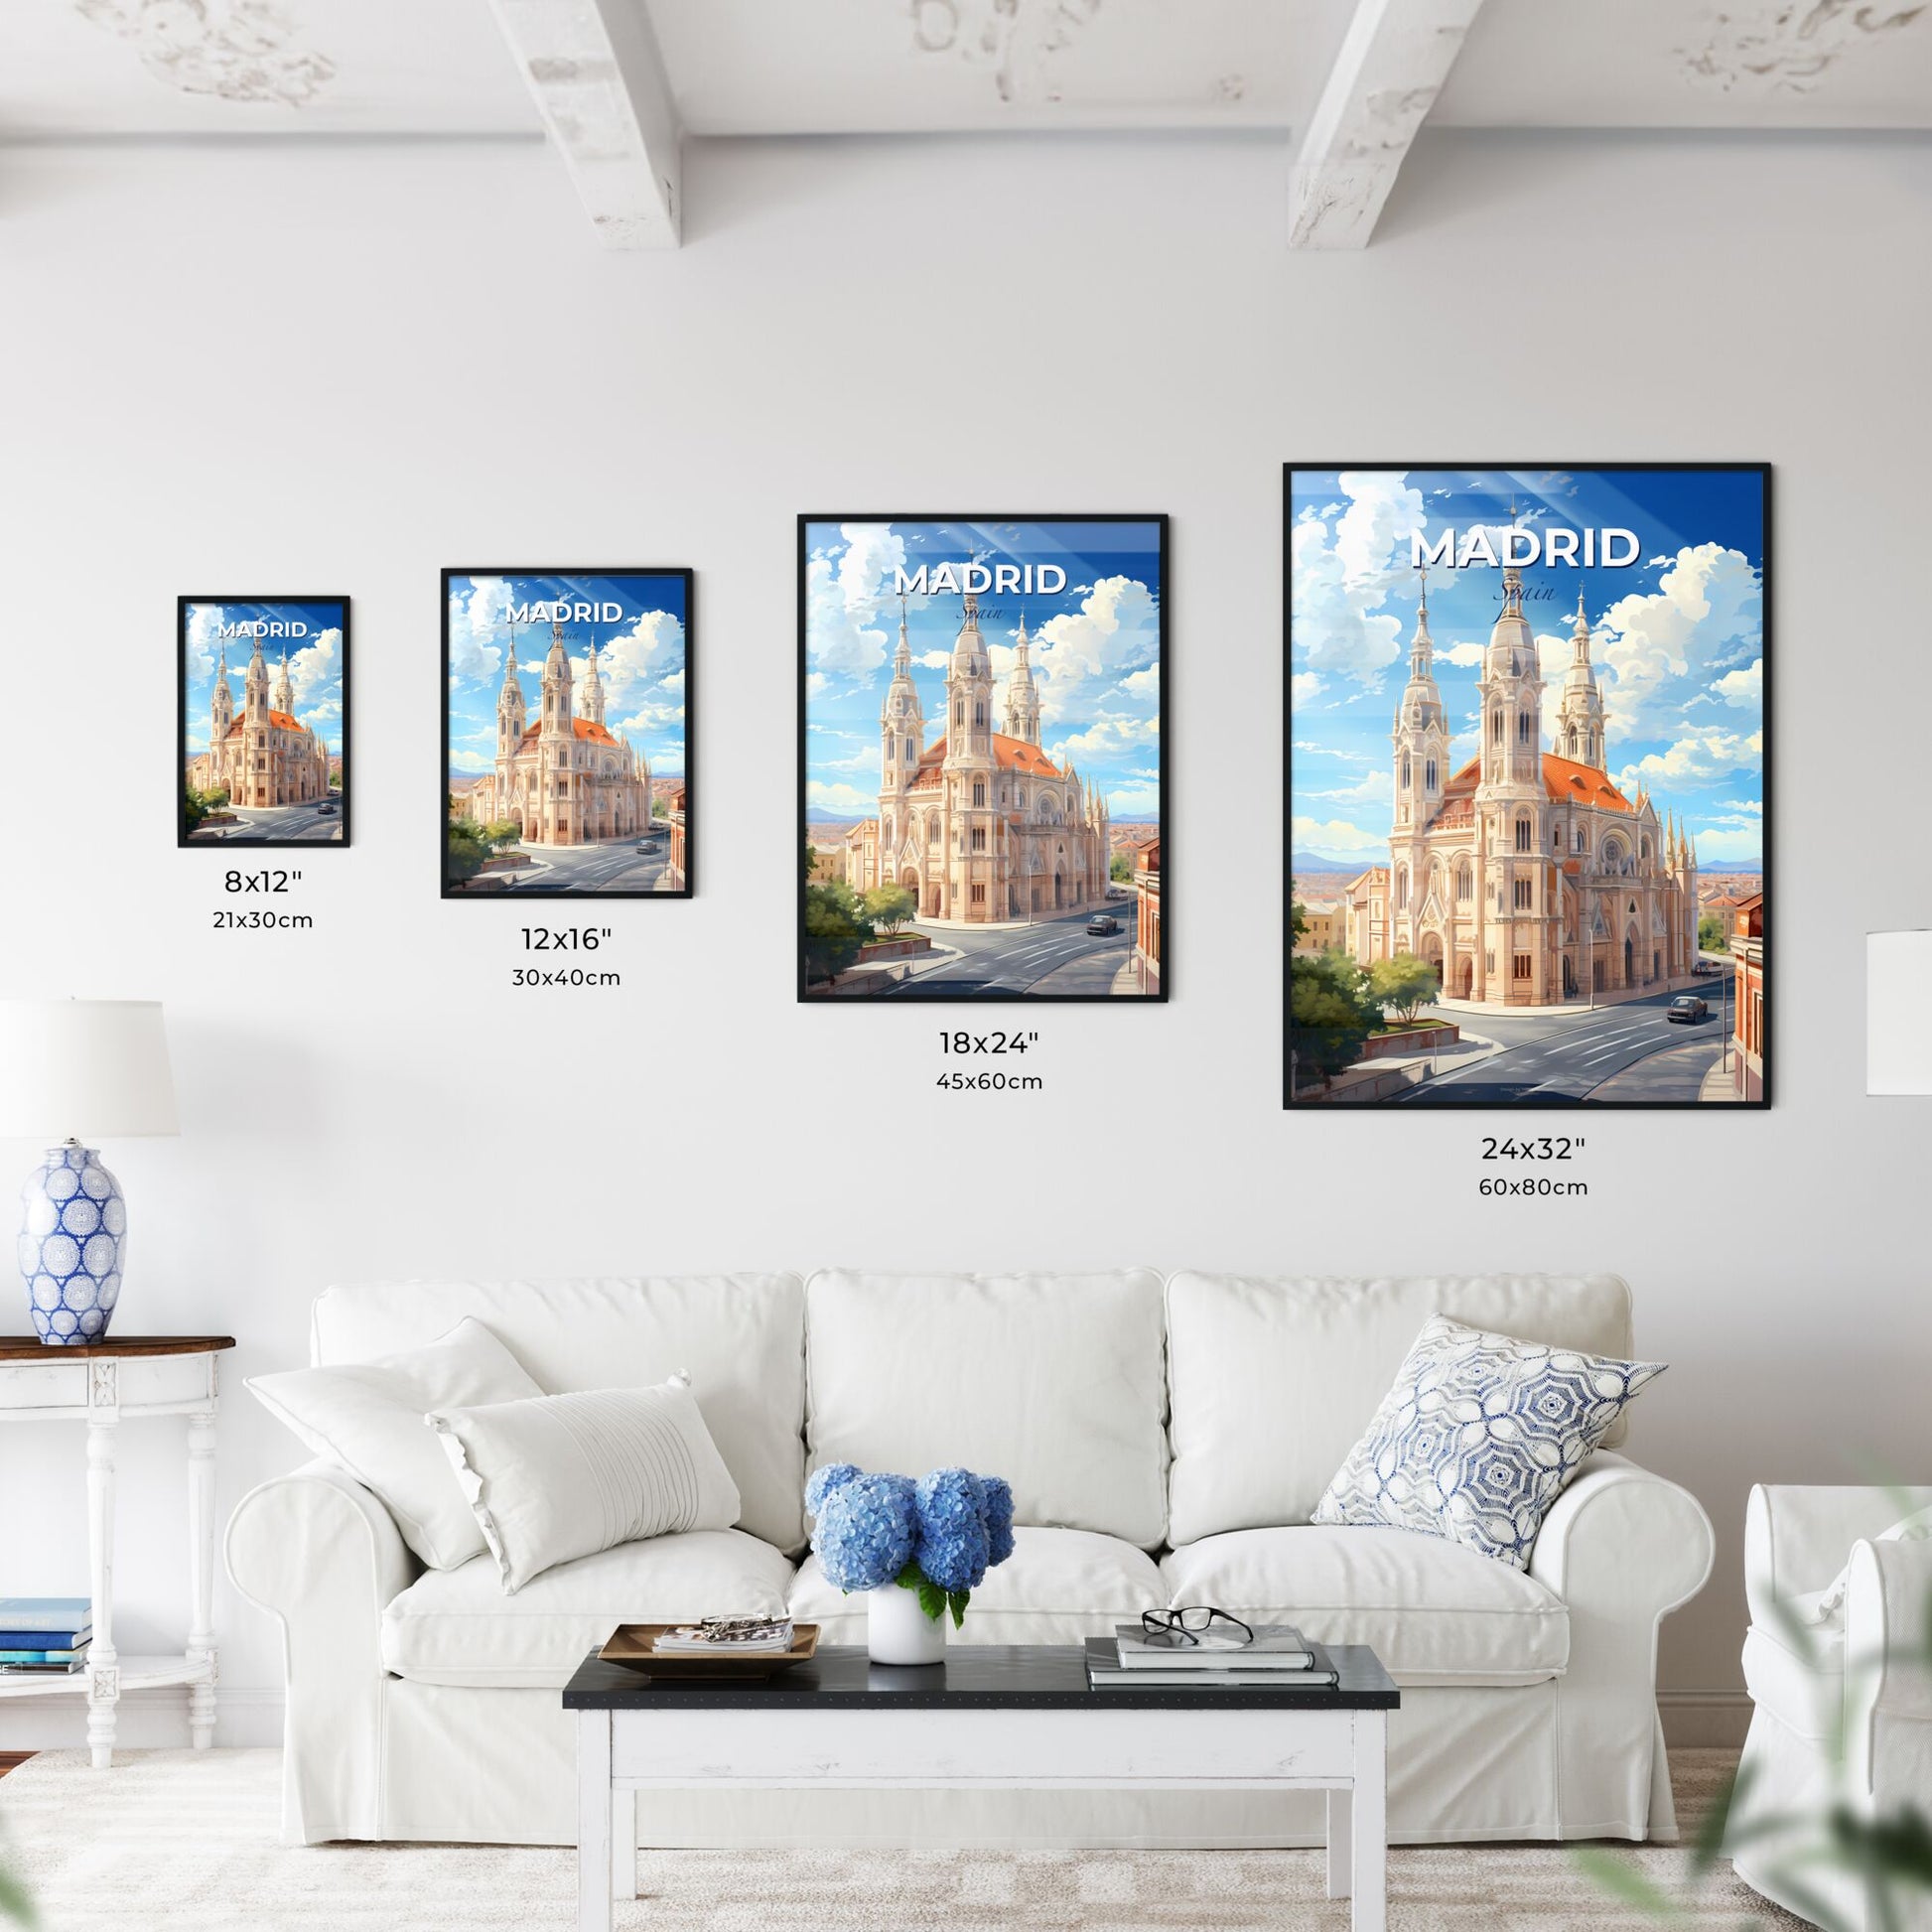 Madrid, Spain, A Poster of a large building with towers and a street in front of it Default Title